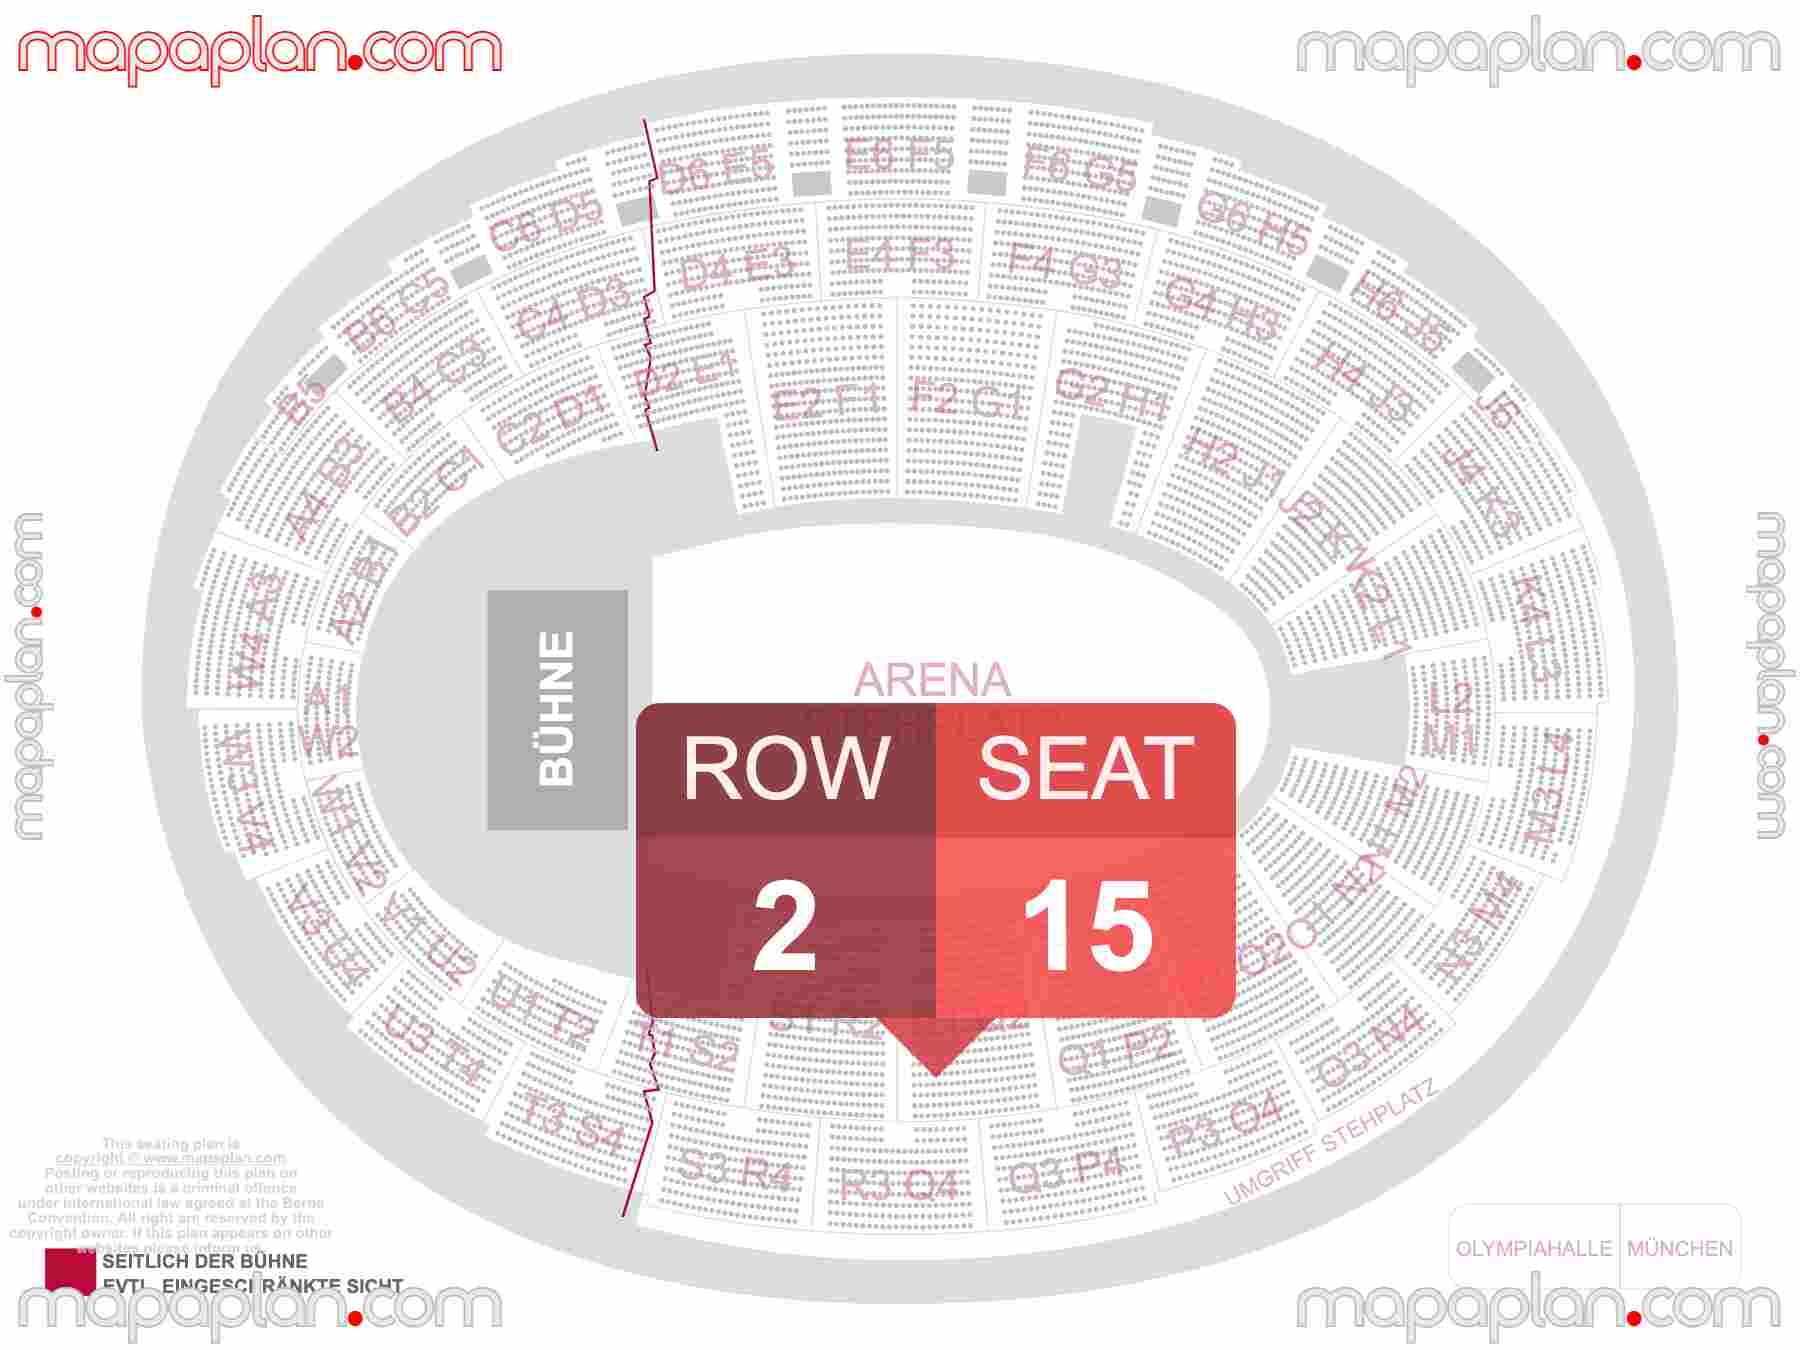 Munich Olympiahalle seating plan Concert with floor general admission standing room only Innenraum mit nur Stehplätze Sitzplan mit Block und Platz nummerierung interactive seating checker map map showing seat numbers per row - Ticket prices sections review diagram